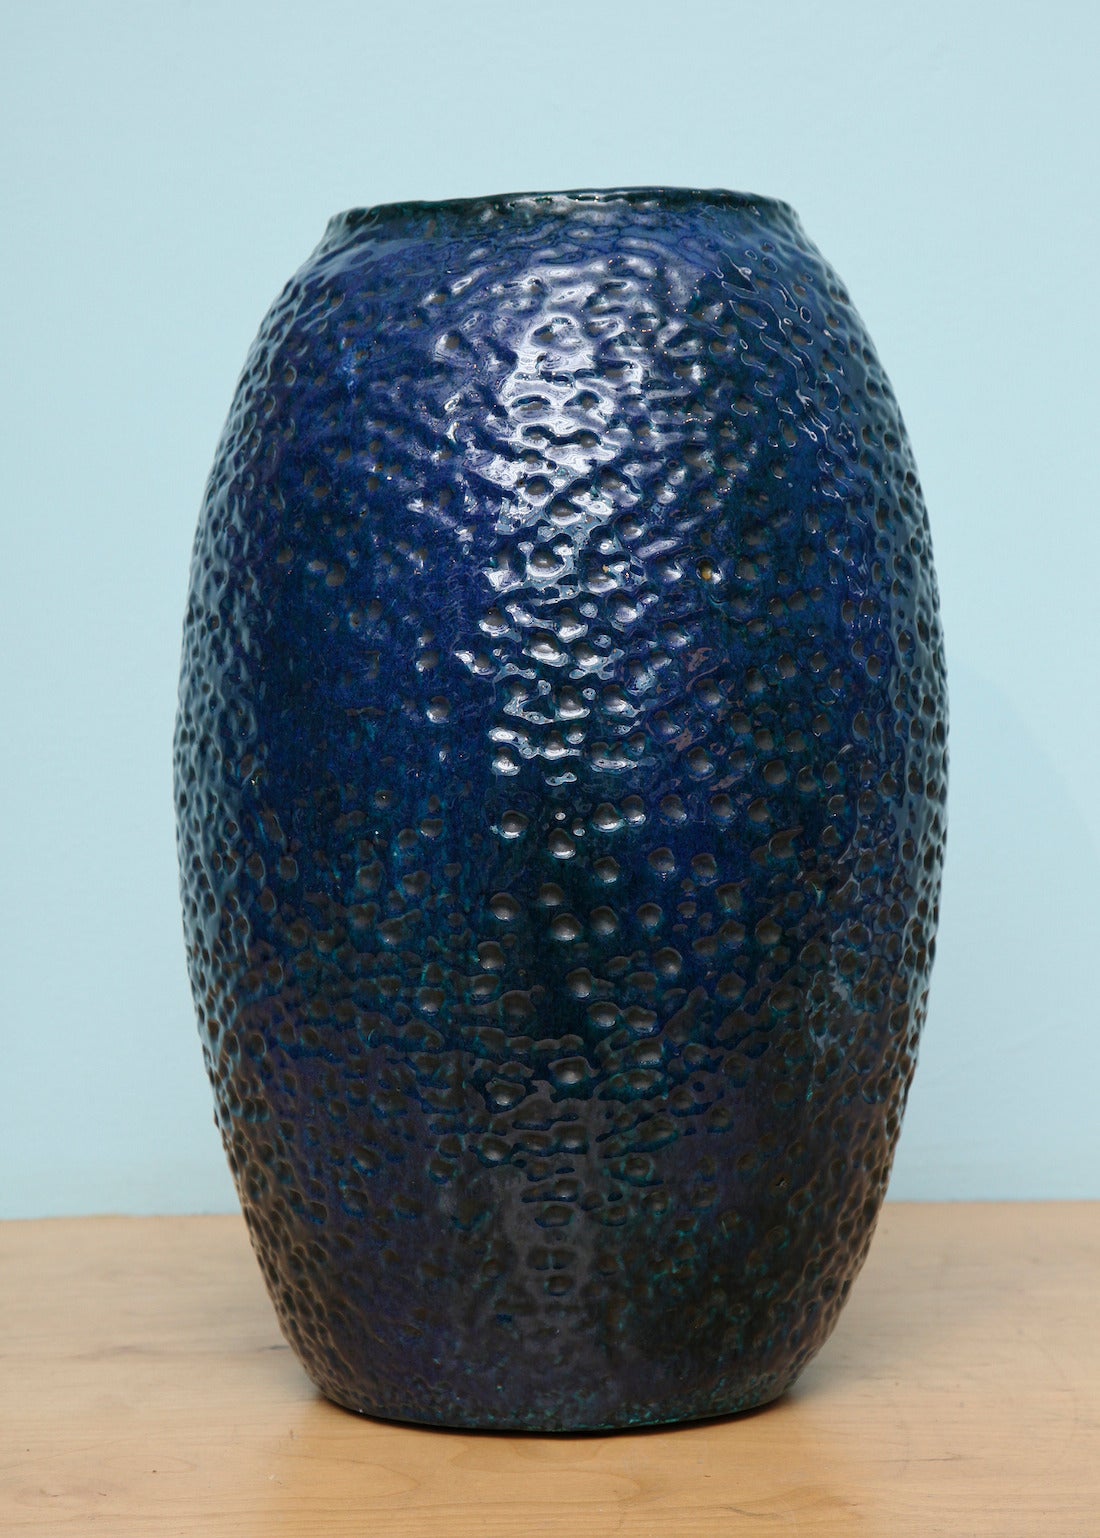 Large scale studio made vase by Marcello Fantoni. Hand-built stoneware vase with great texture throughout and deep blue glaze. Great scale and presence. Signed on underside.